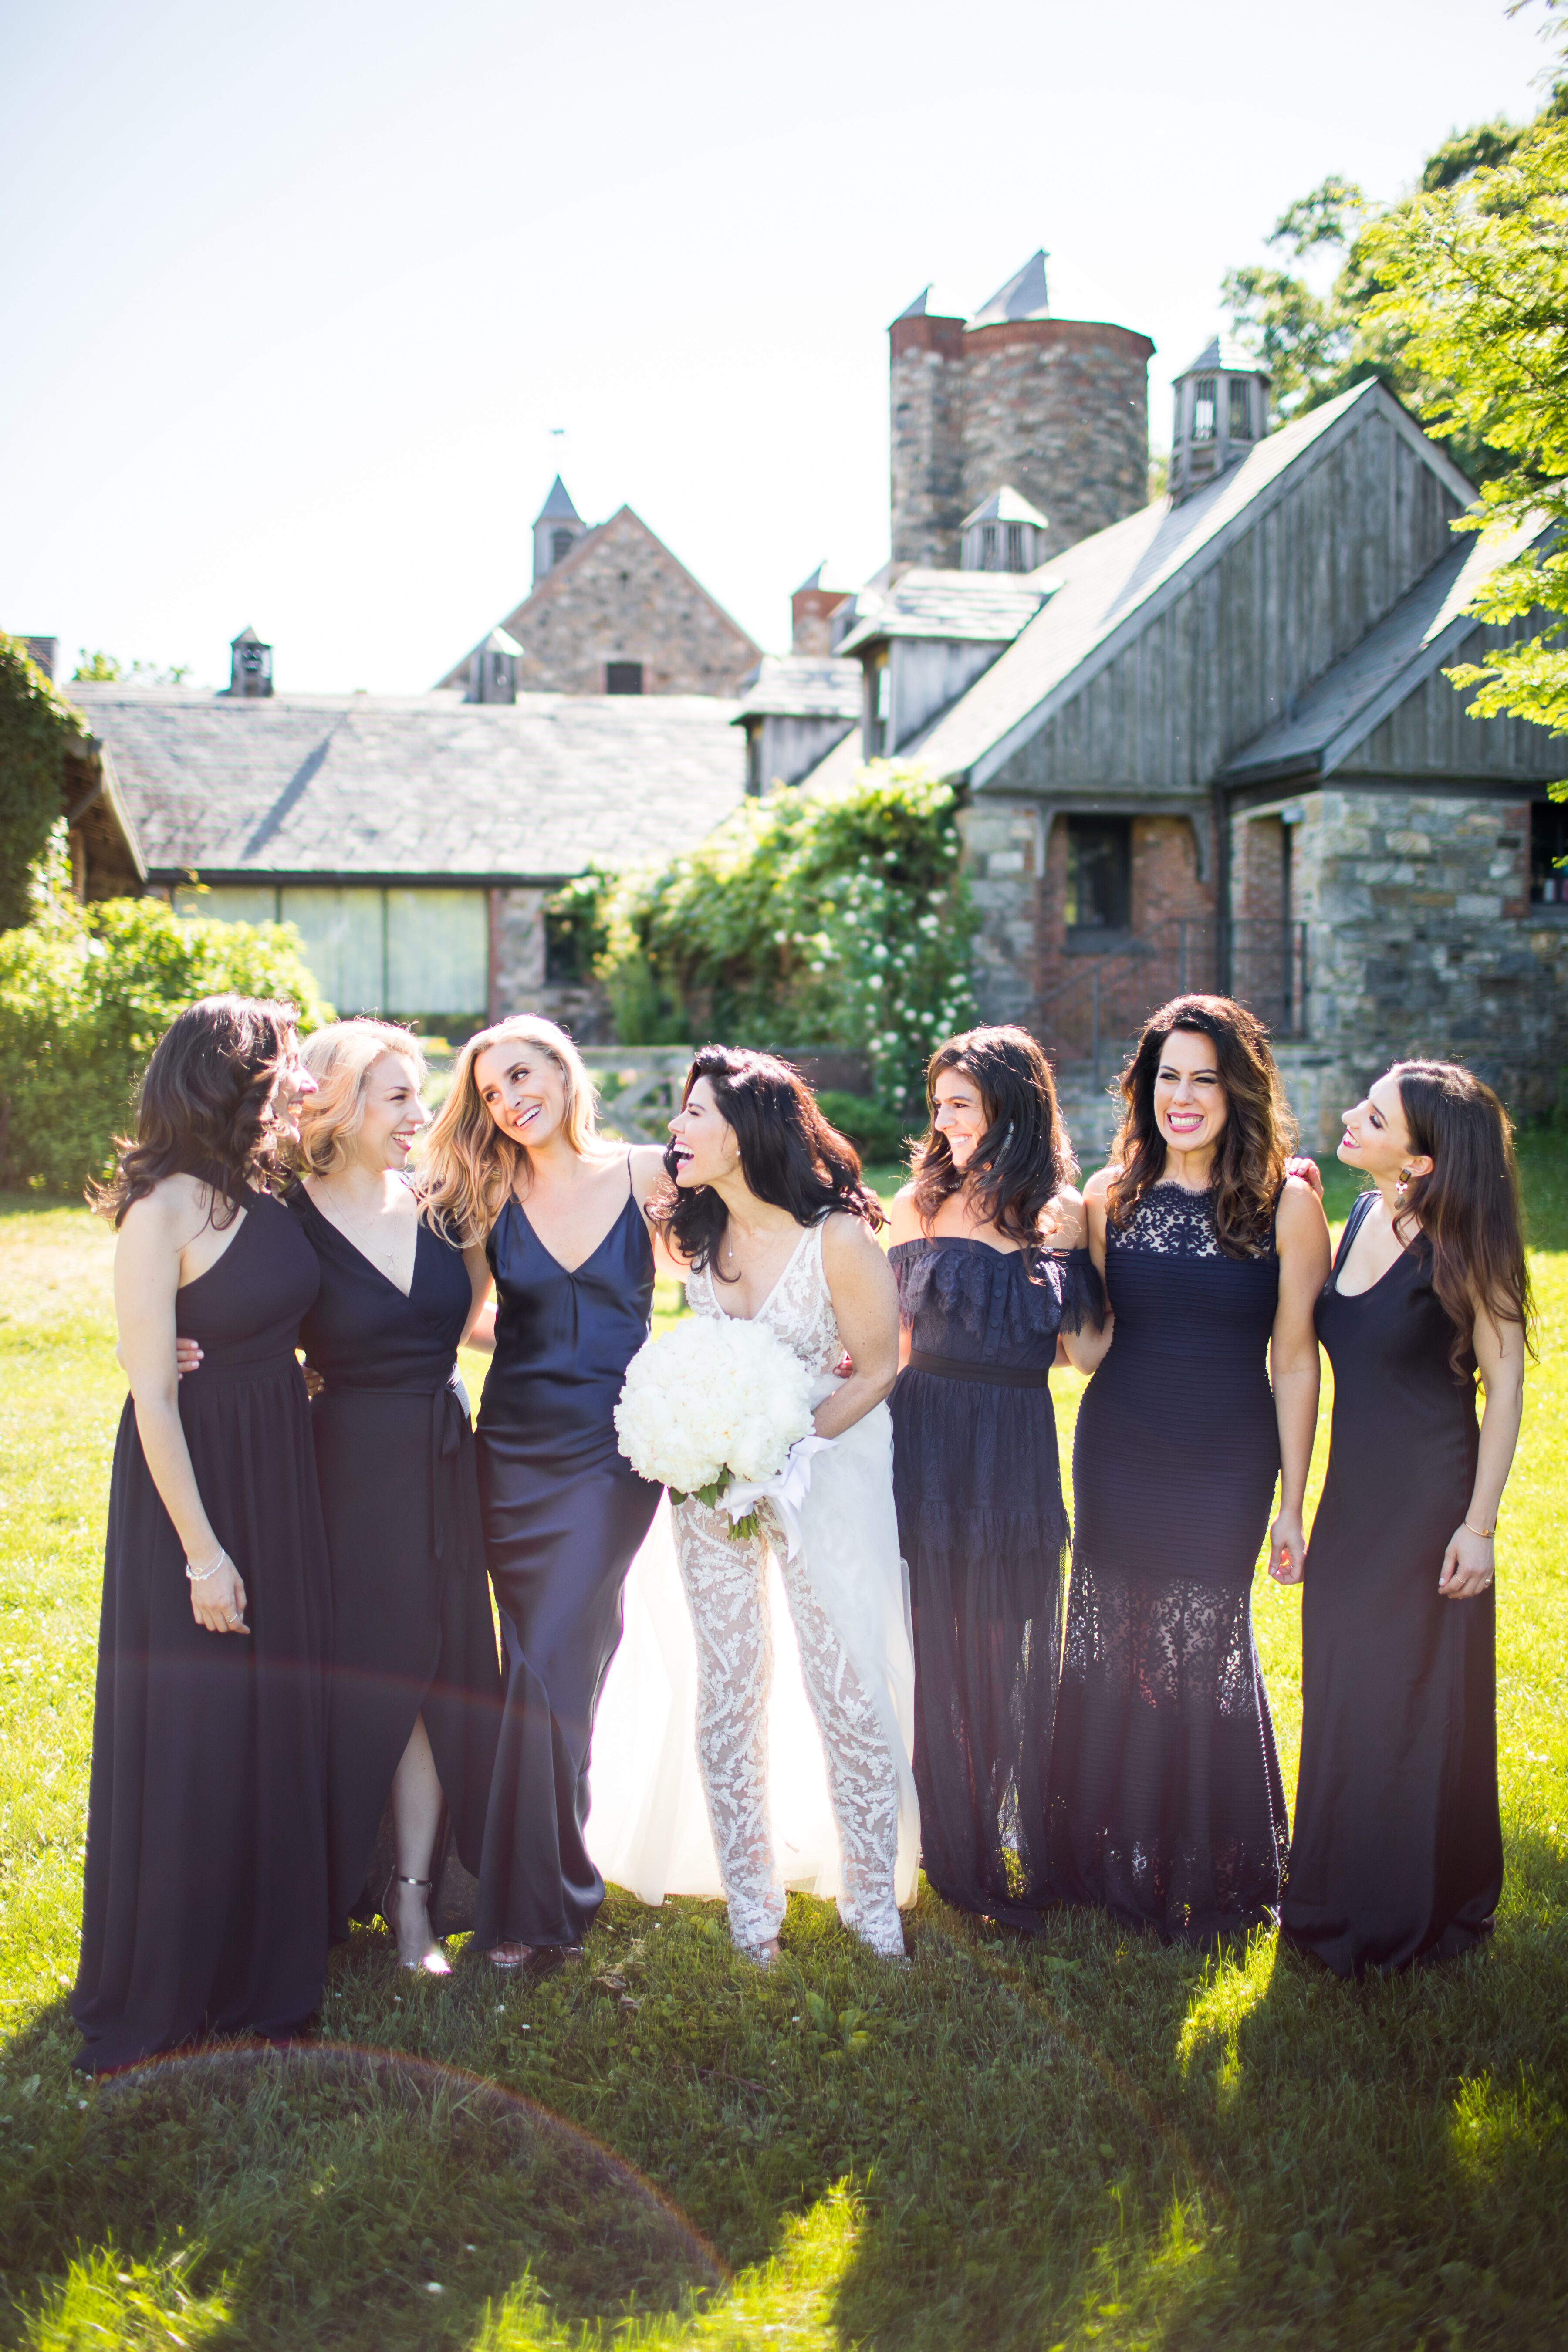 A Rustic BlackTie Wedding at Blue Hill Farm at Stone Barns in